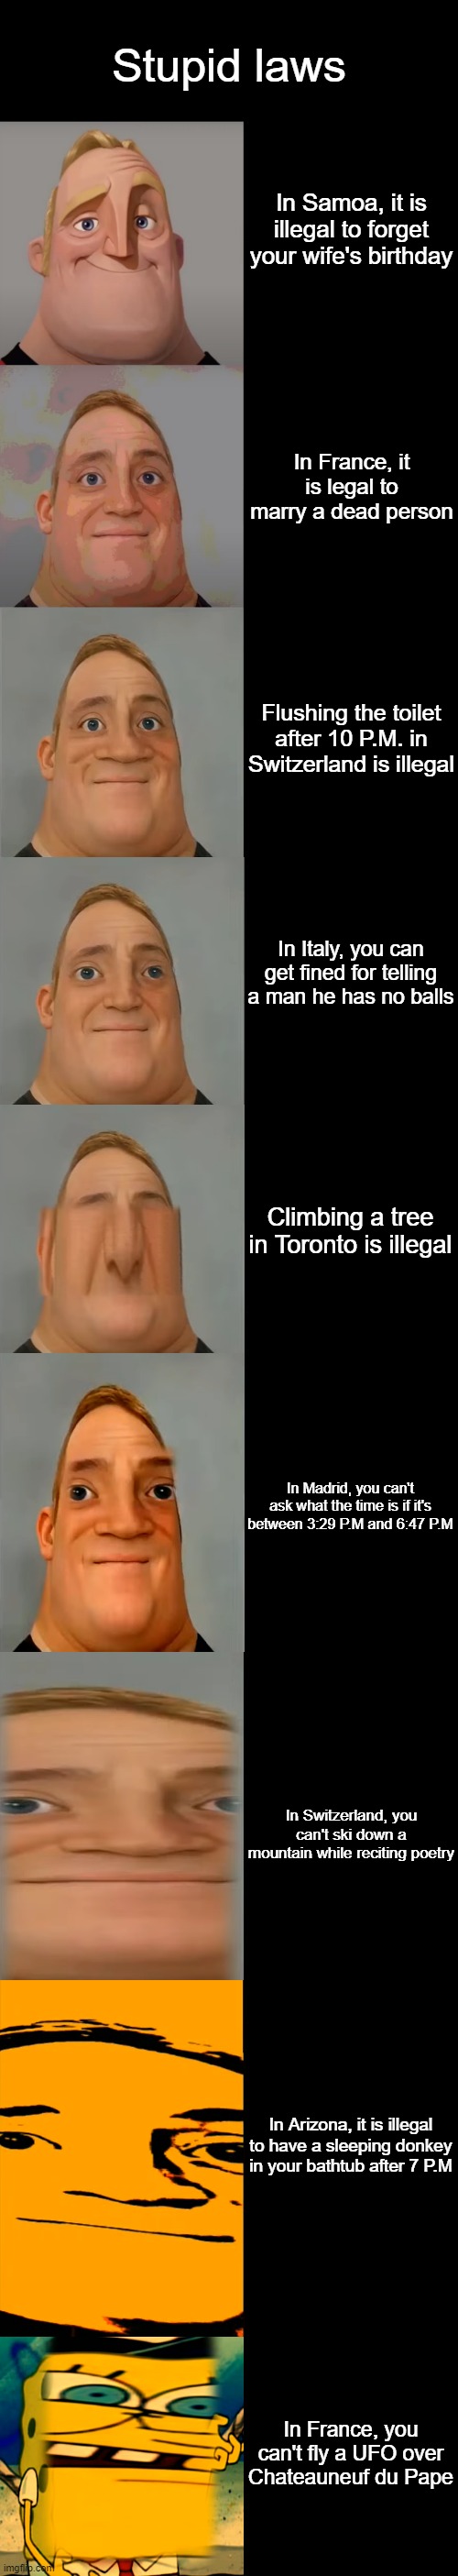 Mr Incredible becoming Idiot template | Stupid laws; In Samoa, it is illegal to forget your wife's birthday; In France, it is legal to marry a dead person; Flushing the toilet after 10 P.M. in Switzerland is illegal; In Italy, you can get fined for telling a man he has no balls; Climbing a tree in Toronto is illegal; In Madrid, you can't ask what the time is if it's between 3:29 P.M and 6:47 P.M; In Switzerland, you can't ski down a mountain while reciting poetry; In Arizona, it is illegal to have a sleeping donkey in your bathtub after 7 P.M; In France, you can't fly a UFO over Chateauneuf du Pape | image tagged in mr incredible becoming idiot template | made w/ Imgflip meme maker